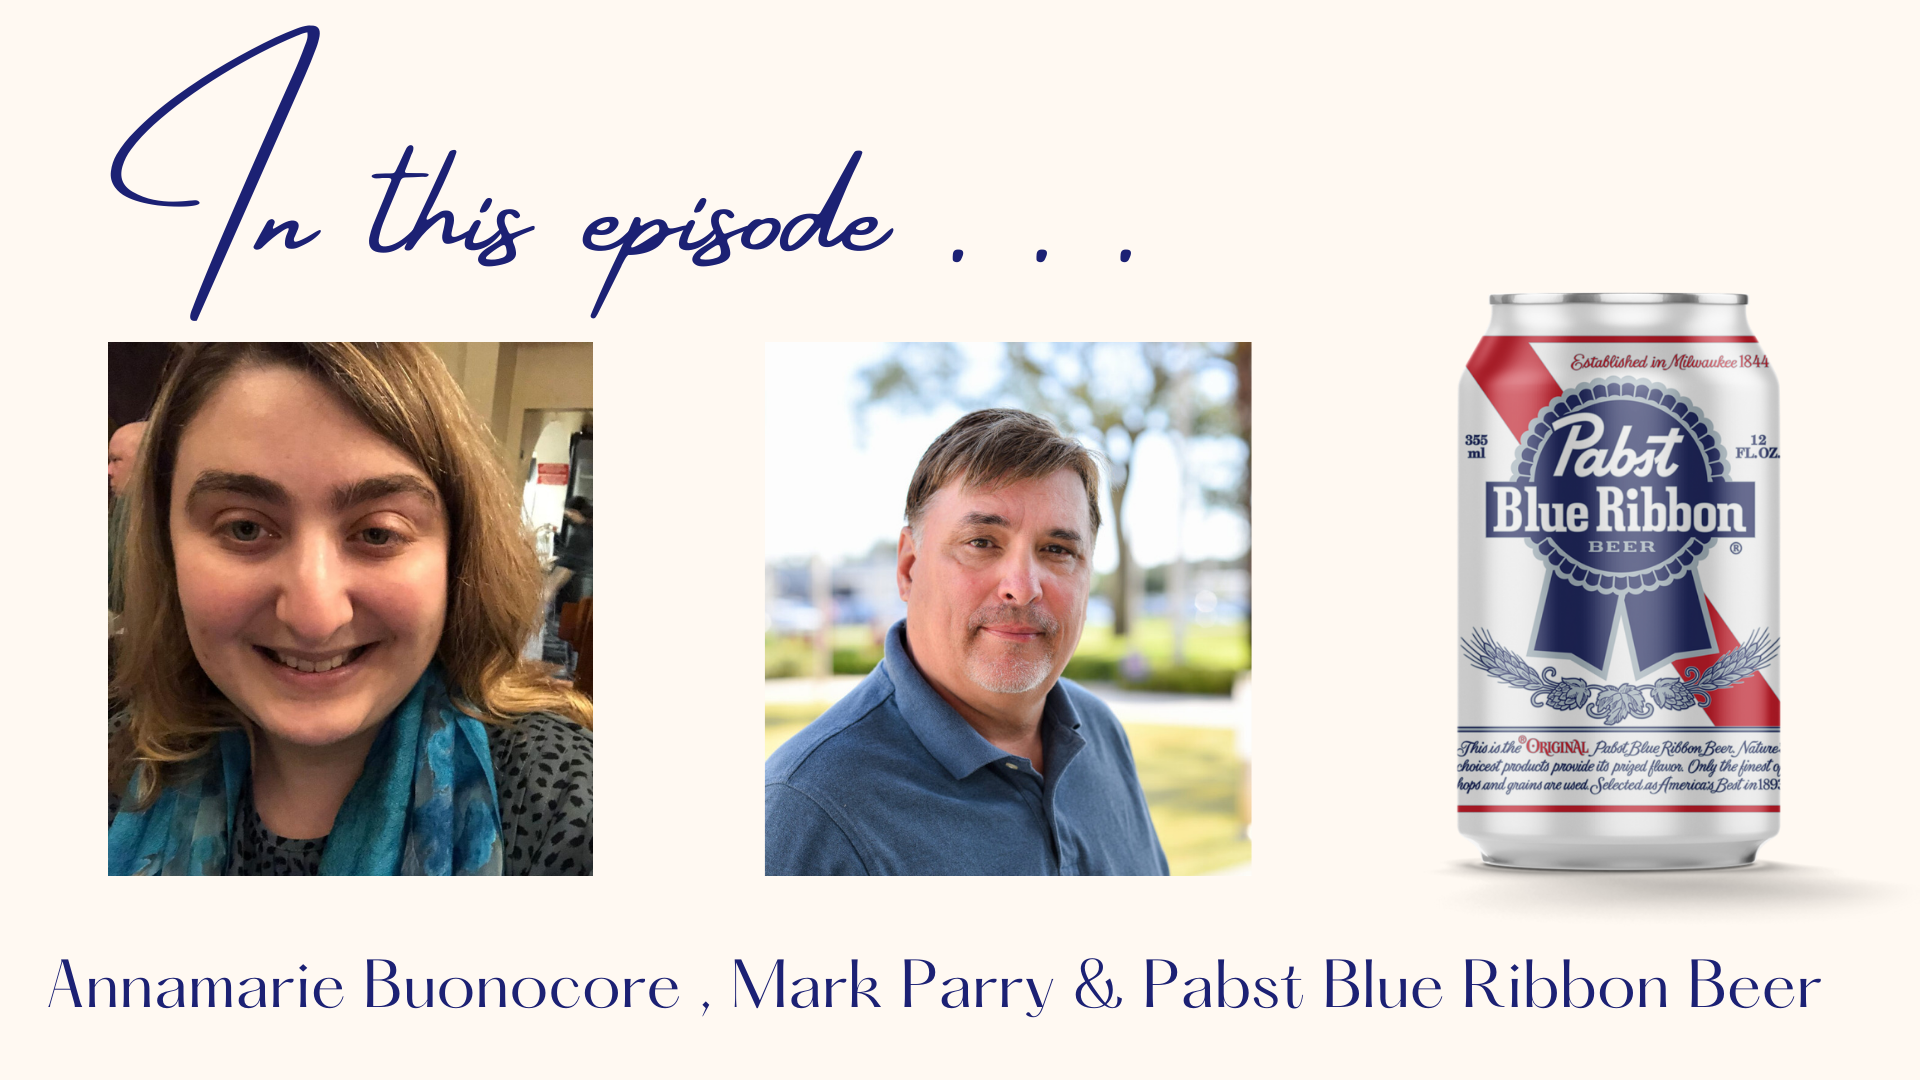 Mark Parry, Annamarie Buonocore & the Pabst Blue Ribbon Beer